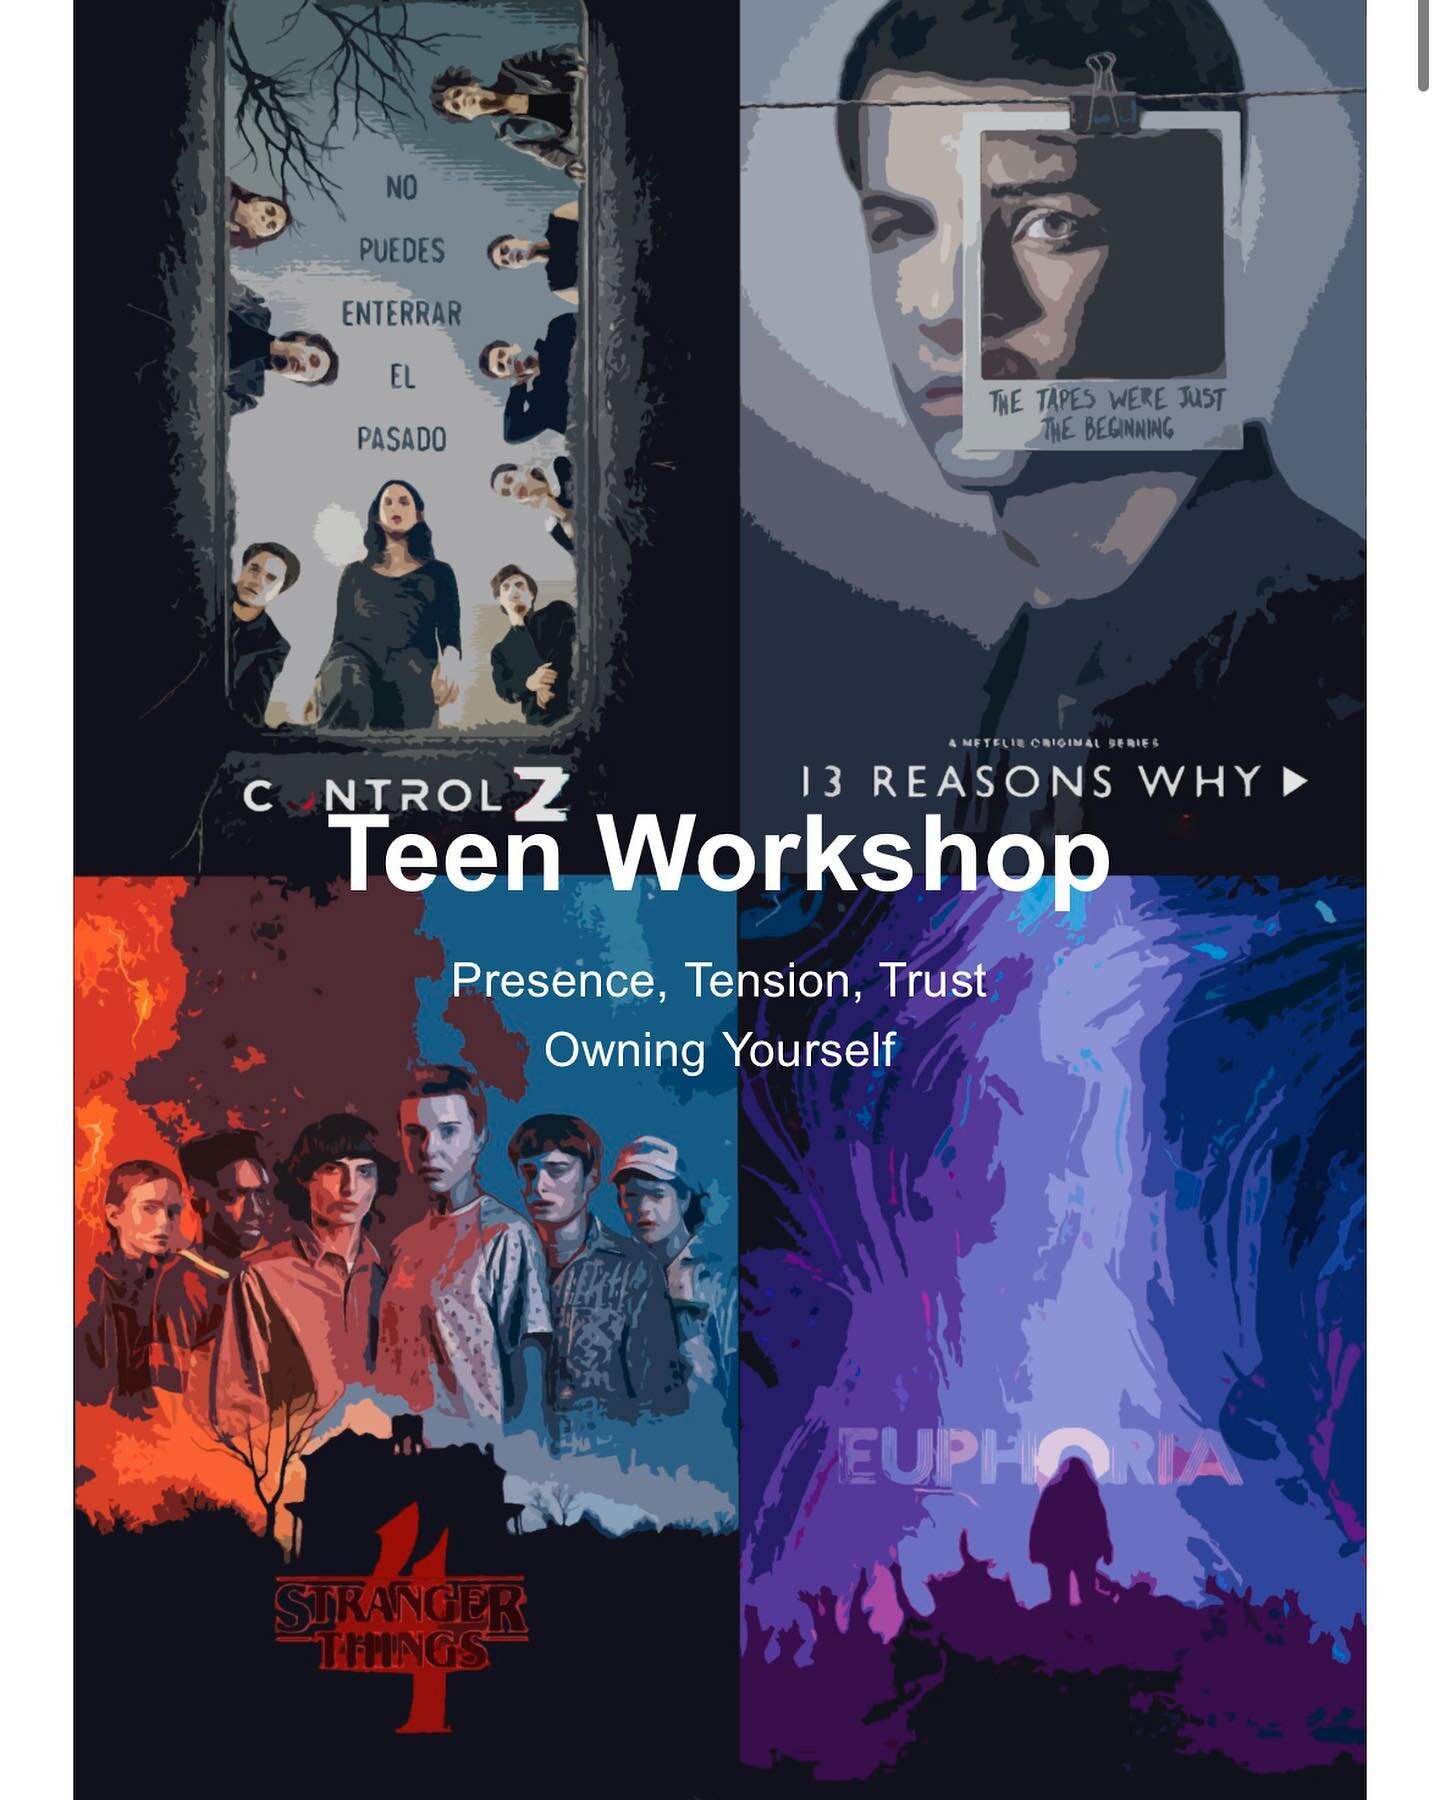 New Workshop. Teen actors this is for you. Discover more of the rare, unusual, unique qualities that make you unlike any other. August 4th and 5th.